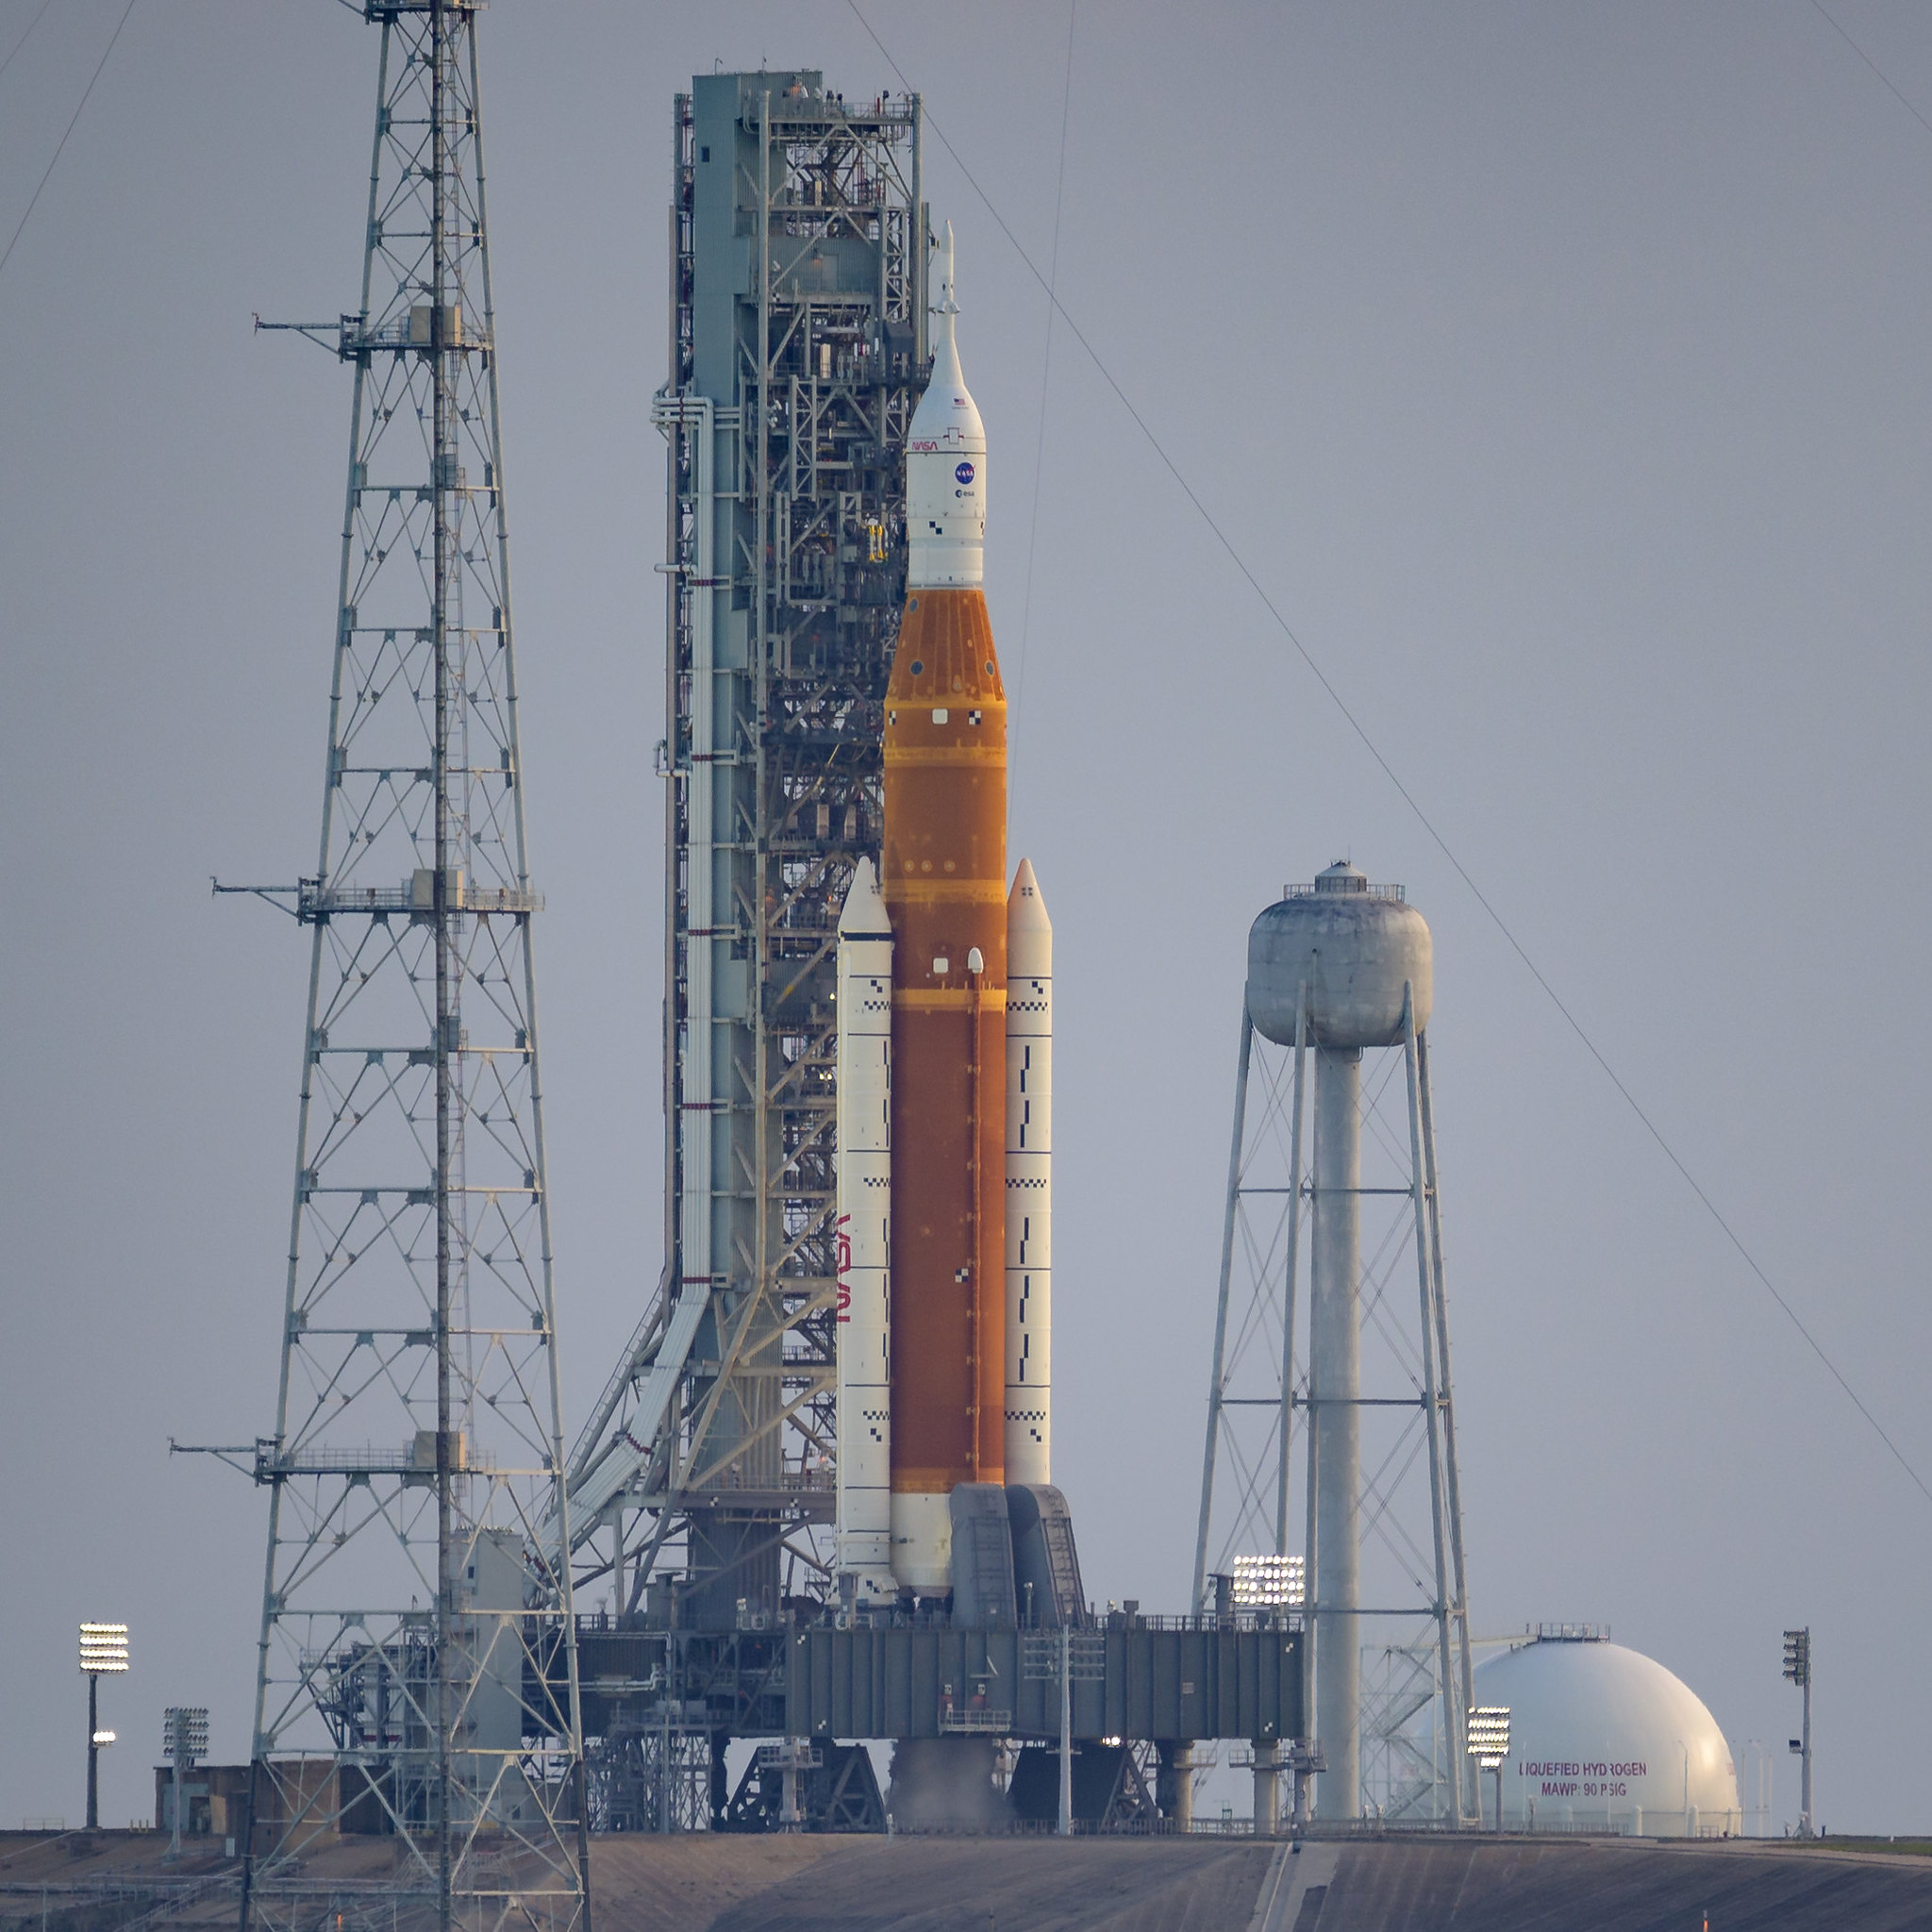 
NASA’s Space Launch System rocket with the Orion spacecraft aboard is seen atop a mobile launcher at Launch Pad 39B on September 3, 2022, at NASA’s Kennedy Space Center in Florida.
